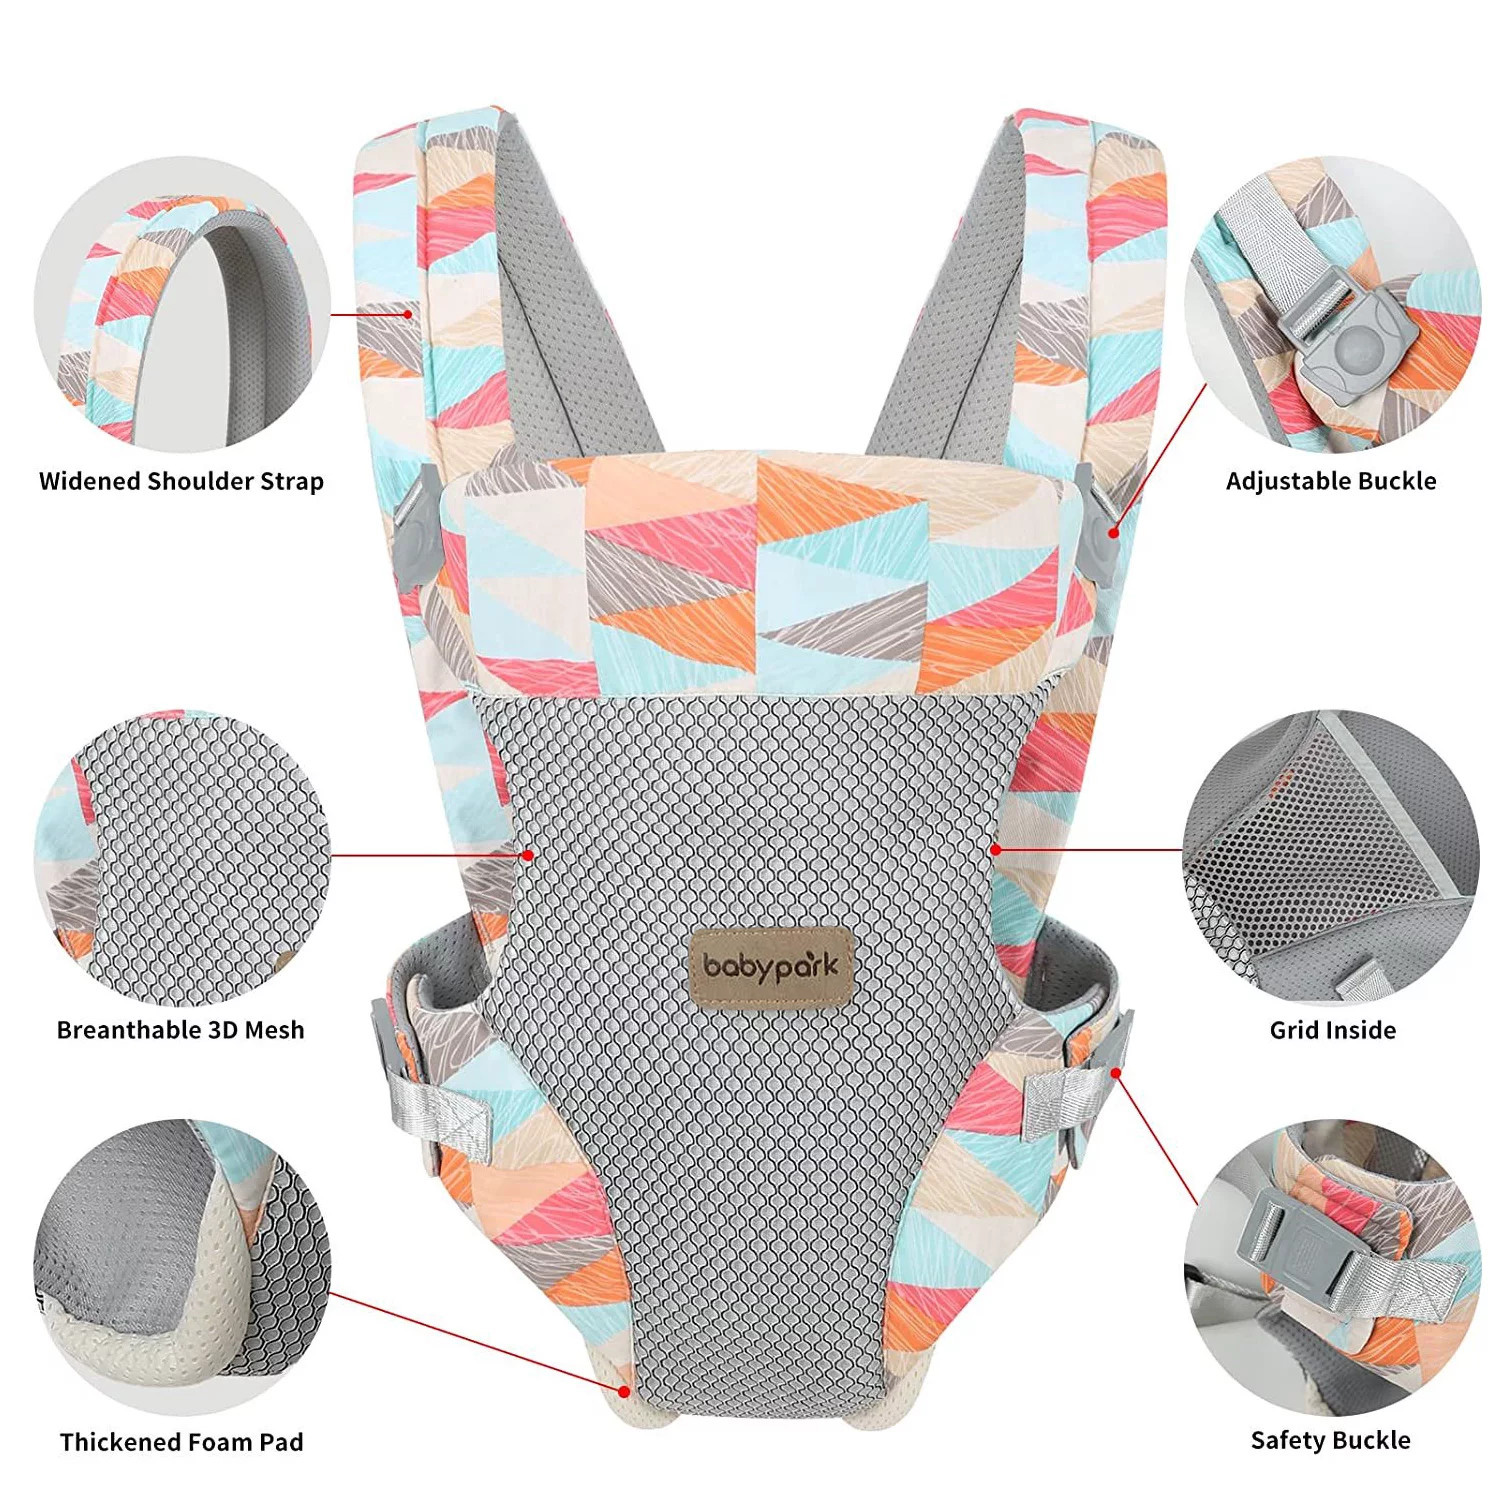 Yadala Baby Carrier, 4-in-1 Colorful Baby Carrier, Front and Back Baby Sling with Adjustable Holder - image 2 of 8